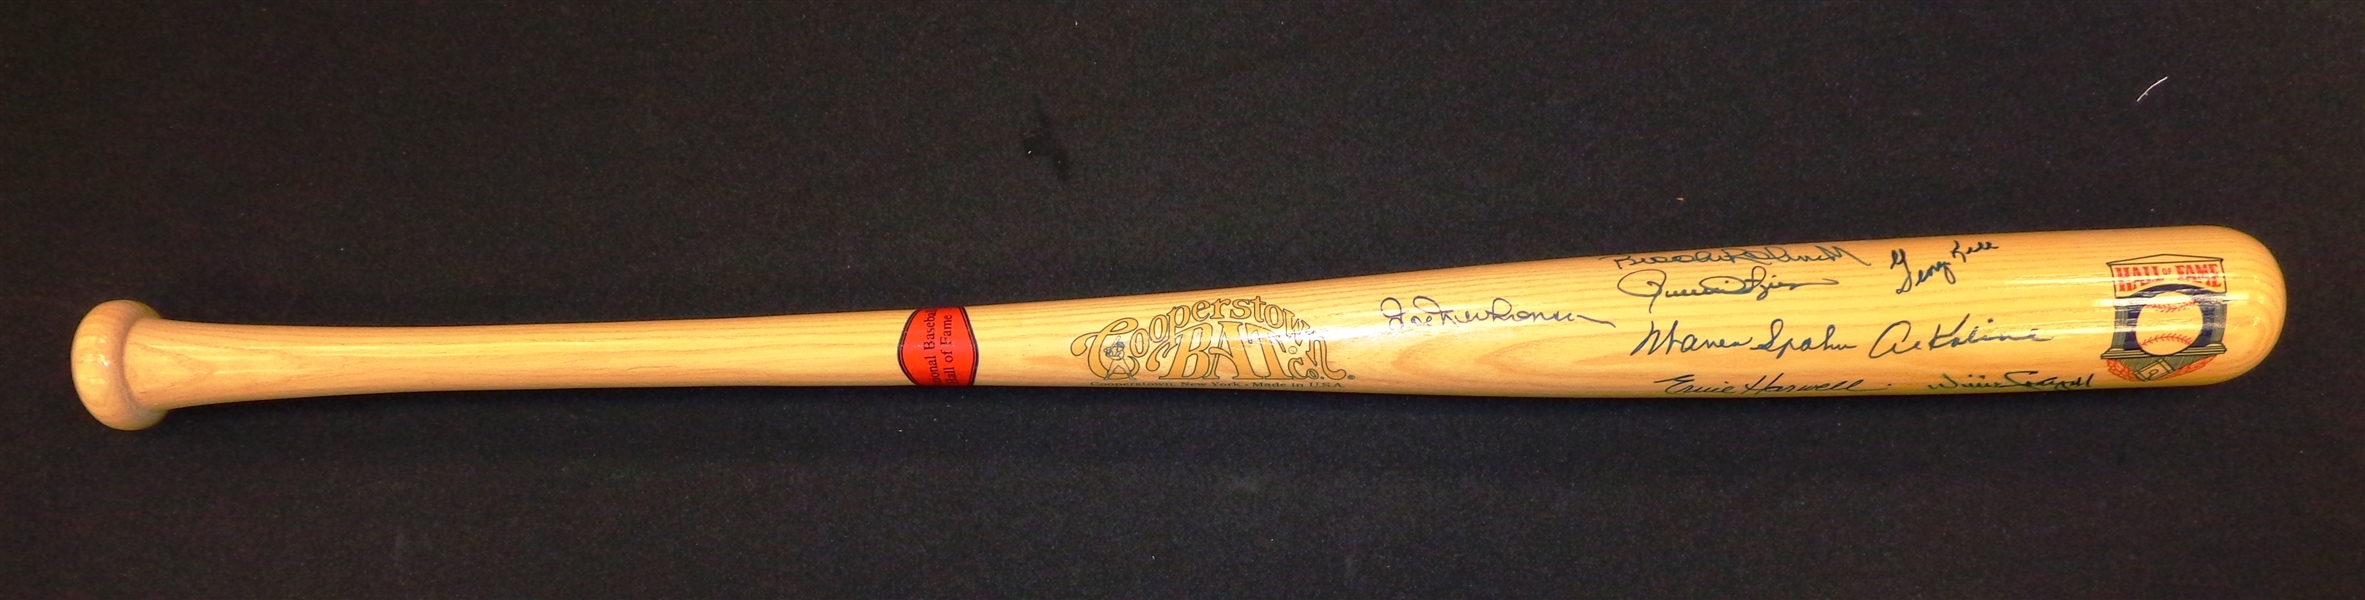 Hall of Fame Bat Signed by 8 Players